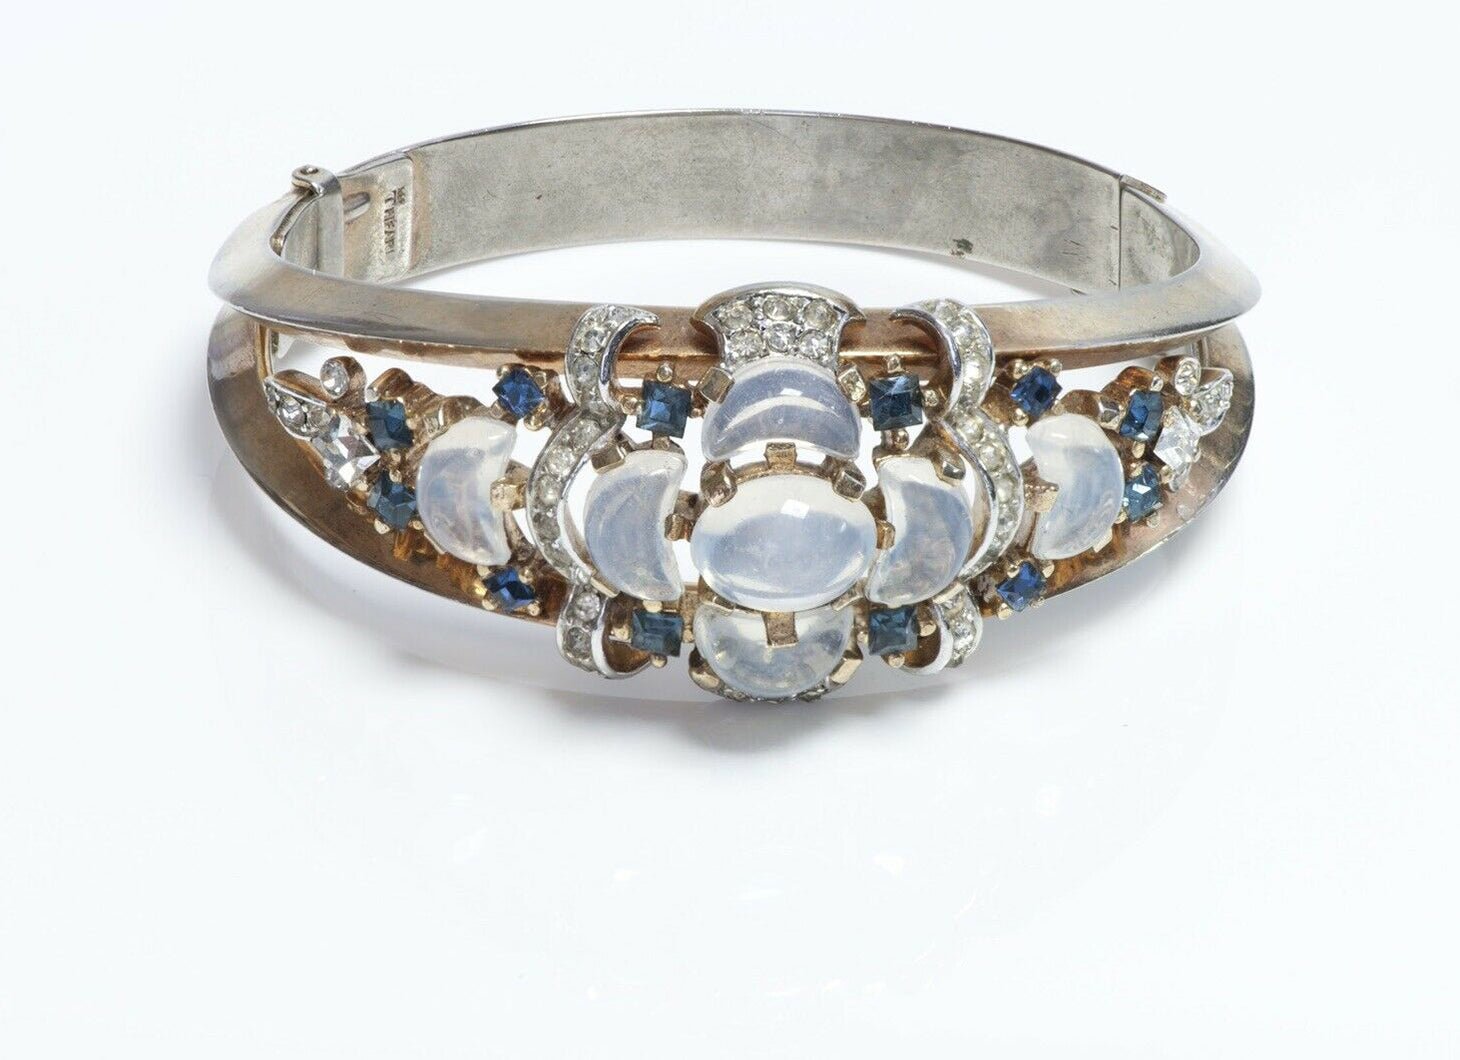 TRIFARI Alfred Philippe Clair De Lune Jelly Belly Blue Crystal Bangle Bracelet